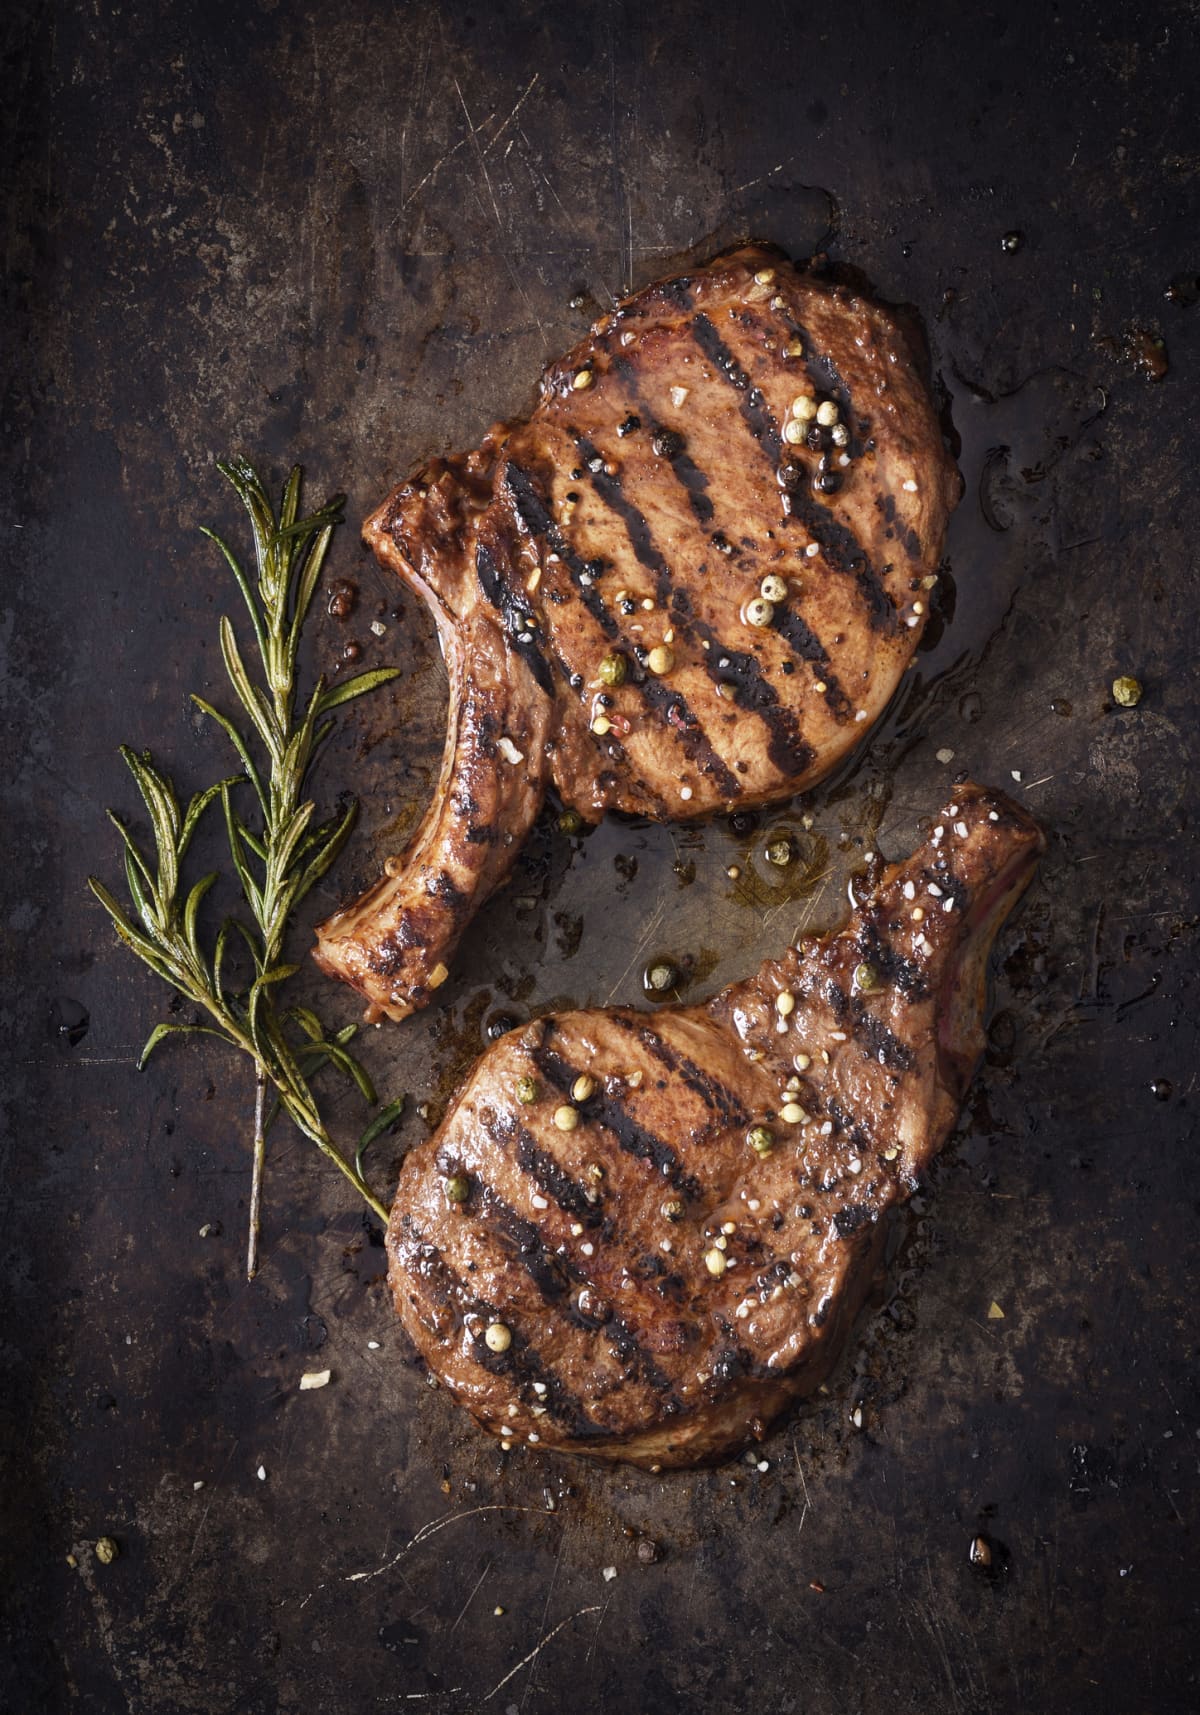 Grilled pork chops with herbs on a dark background